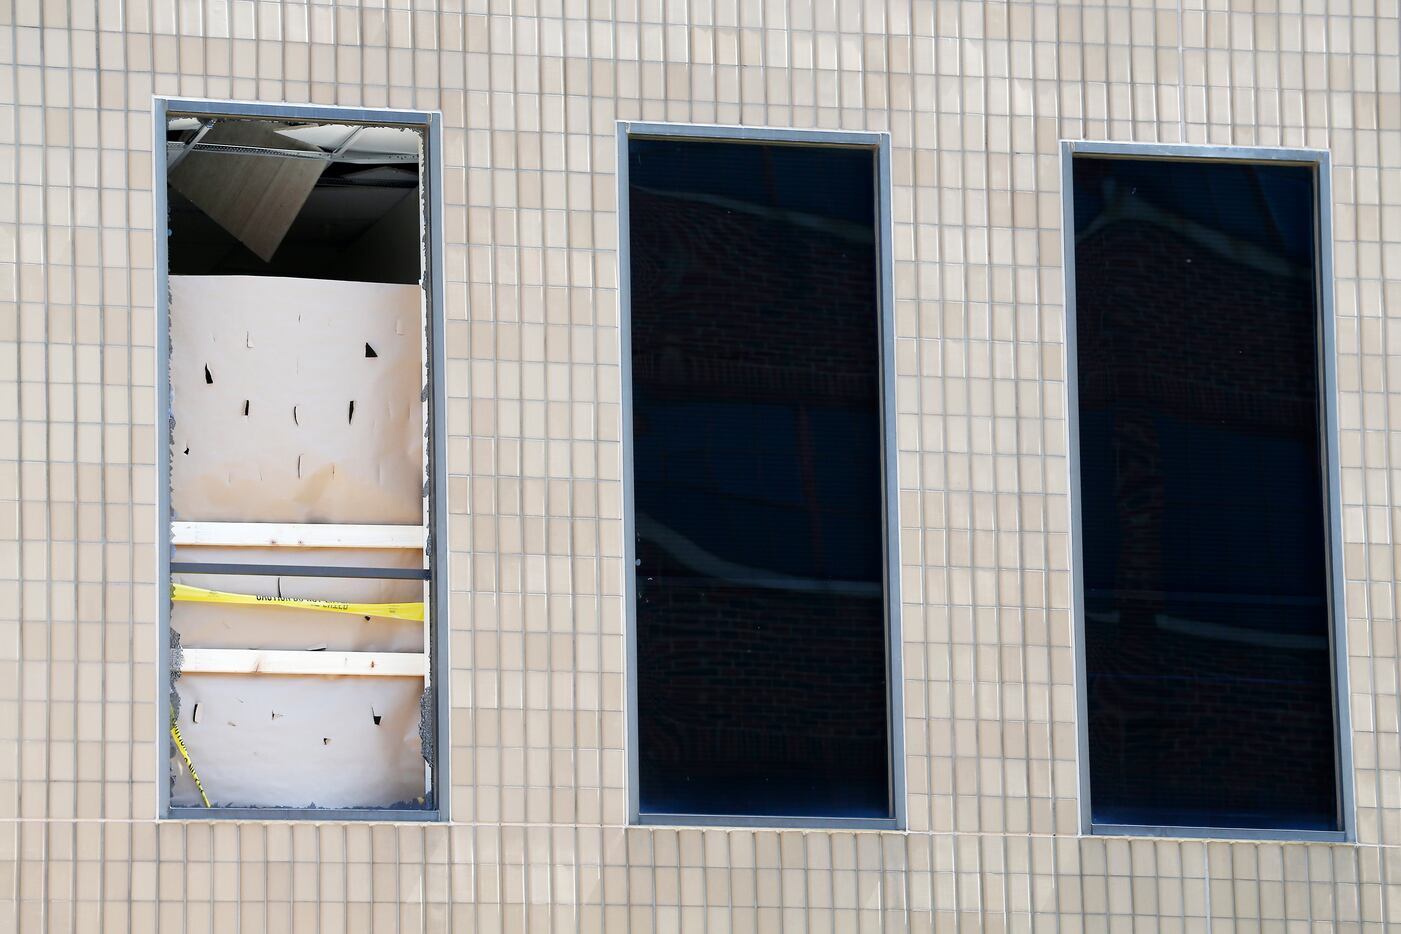 A broken window of a room close to the area where Micah Johnson was holed up and killed on...